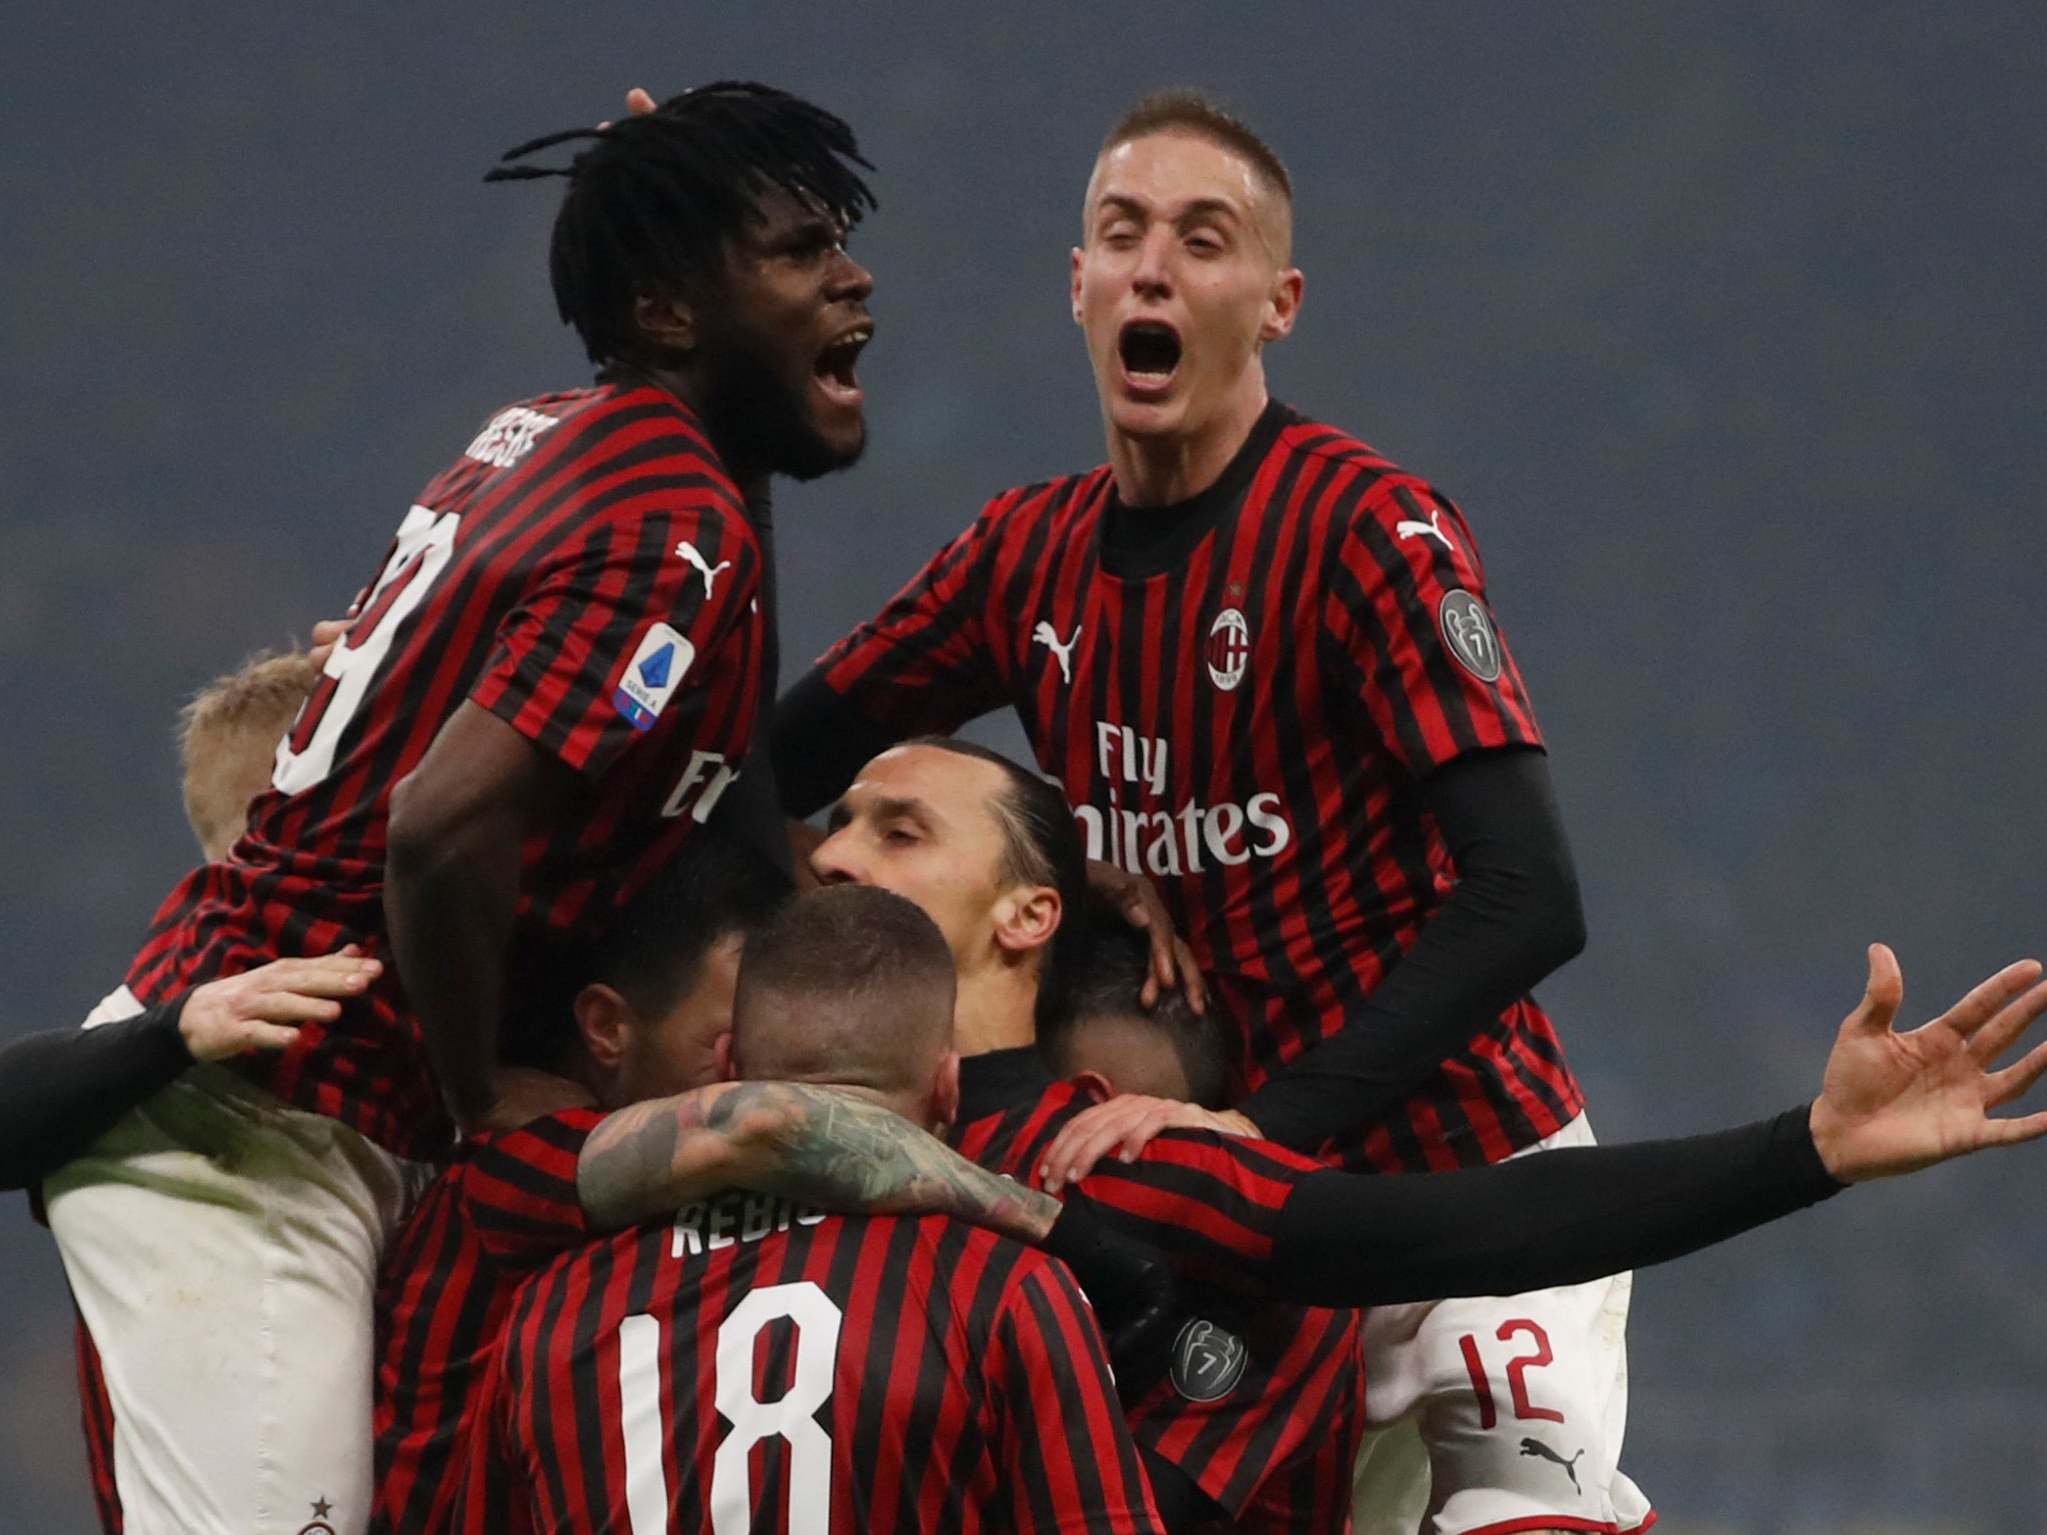 Ibrahimovic is mobbed after scoring in the Milan derby